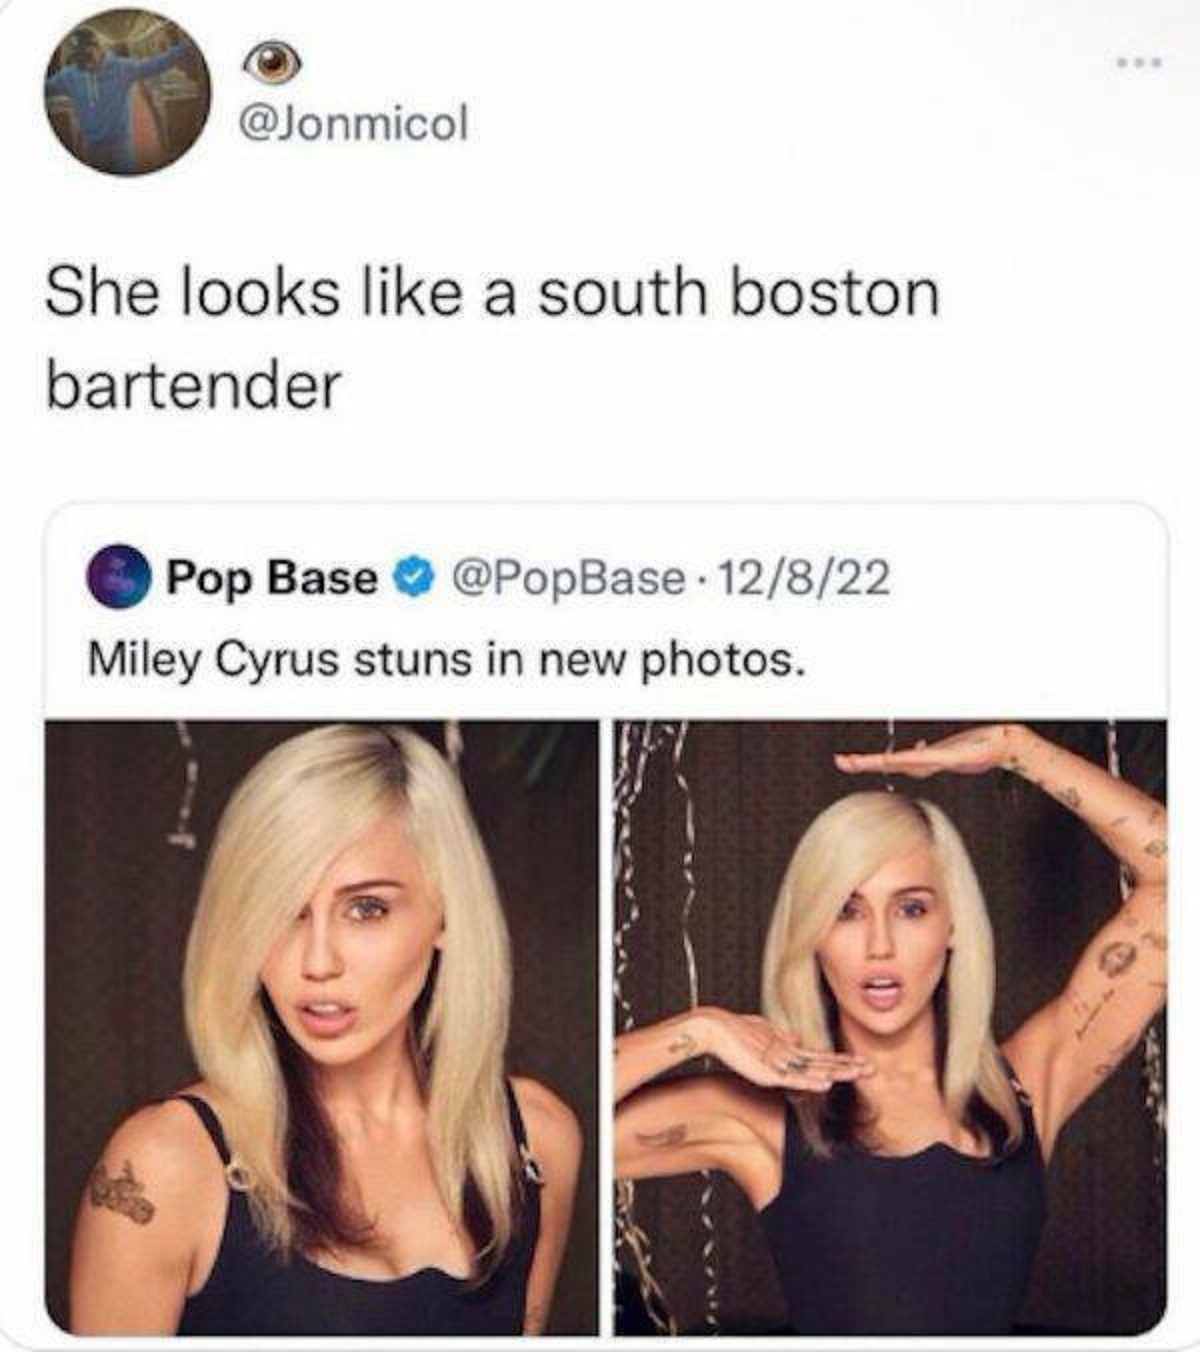 funny tweets - miley cyrus looks like a south boston bartender - She looks a south boston bartender Pop Base 12822 Miley Cyrus stuns in new photos.